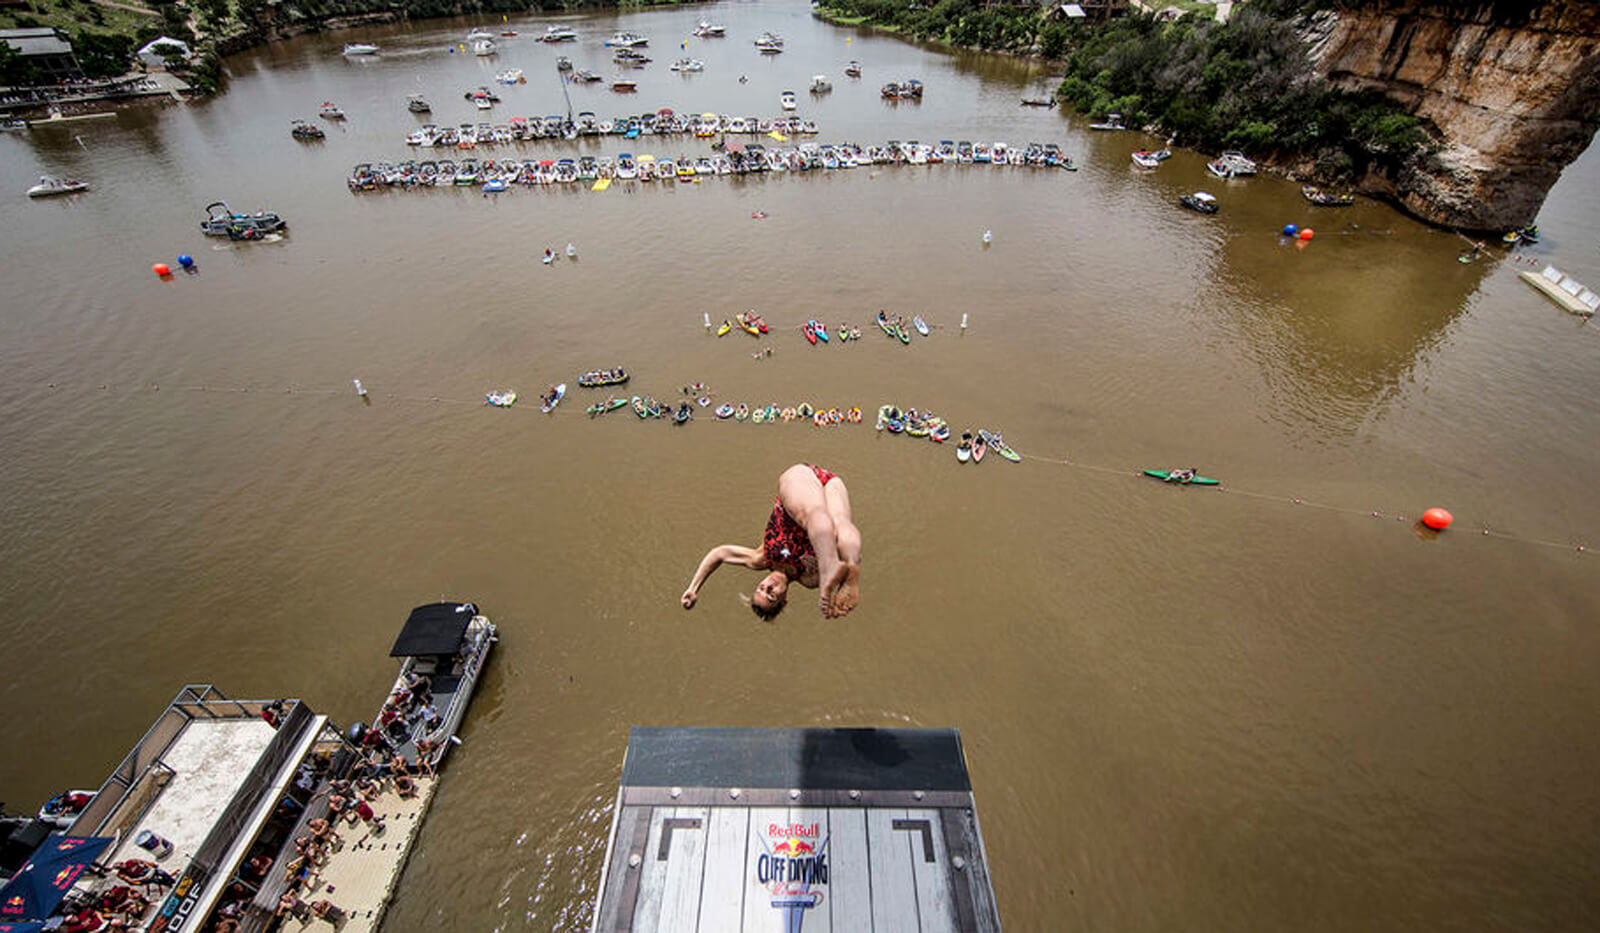 Richard returns to Red Bull Cliff Diving Circuit with top-five finish